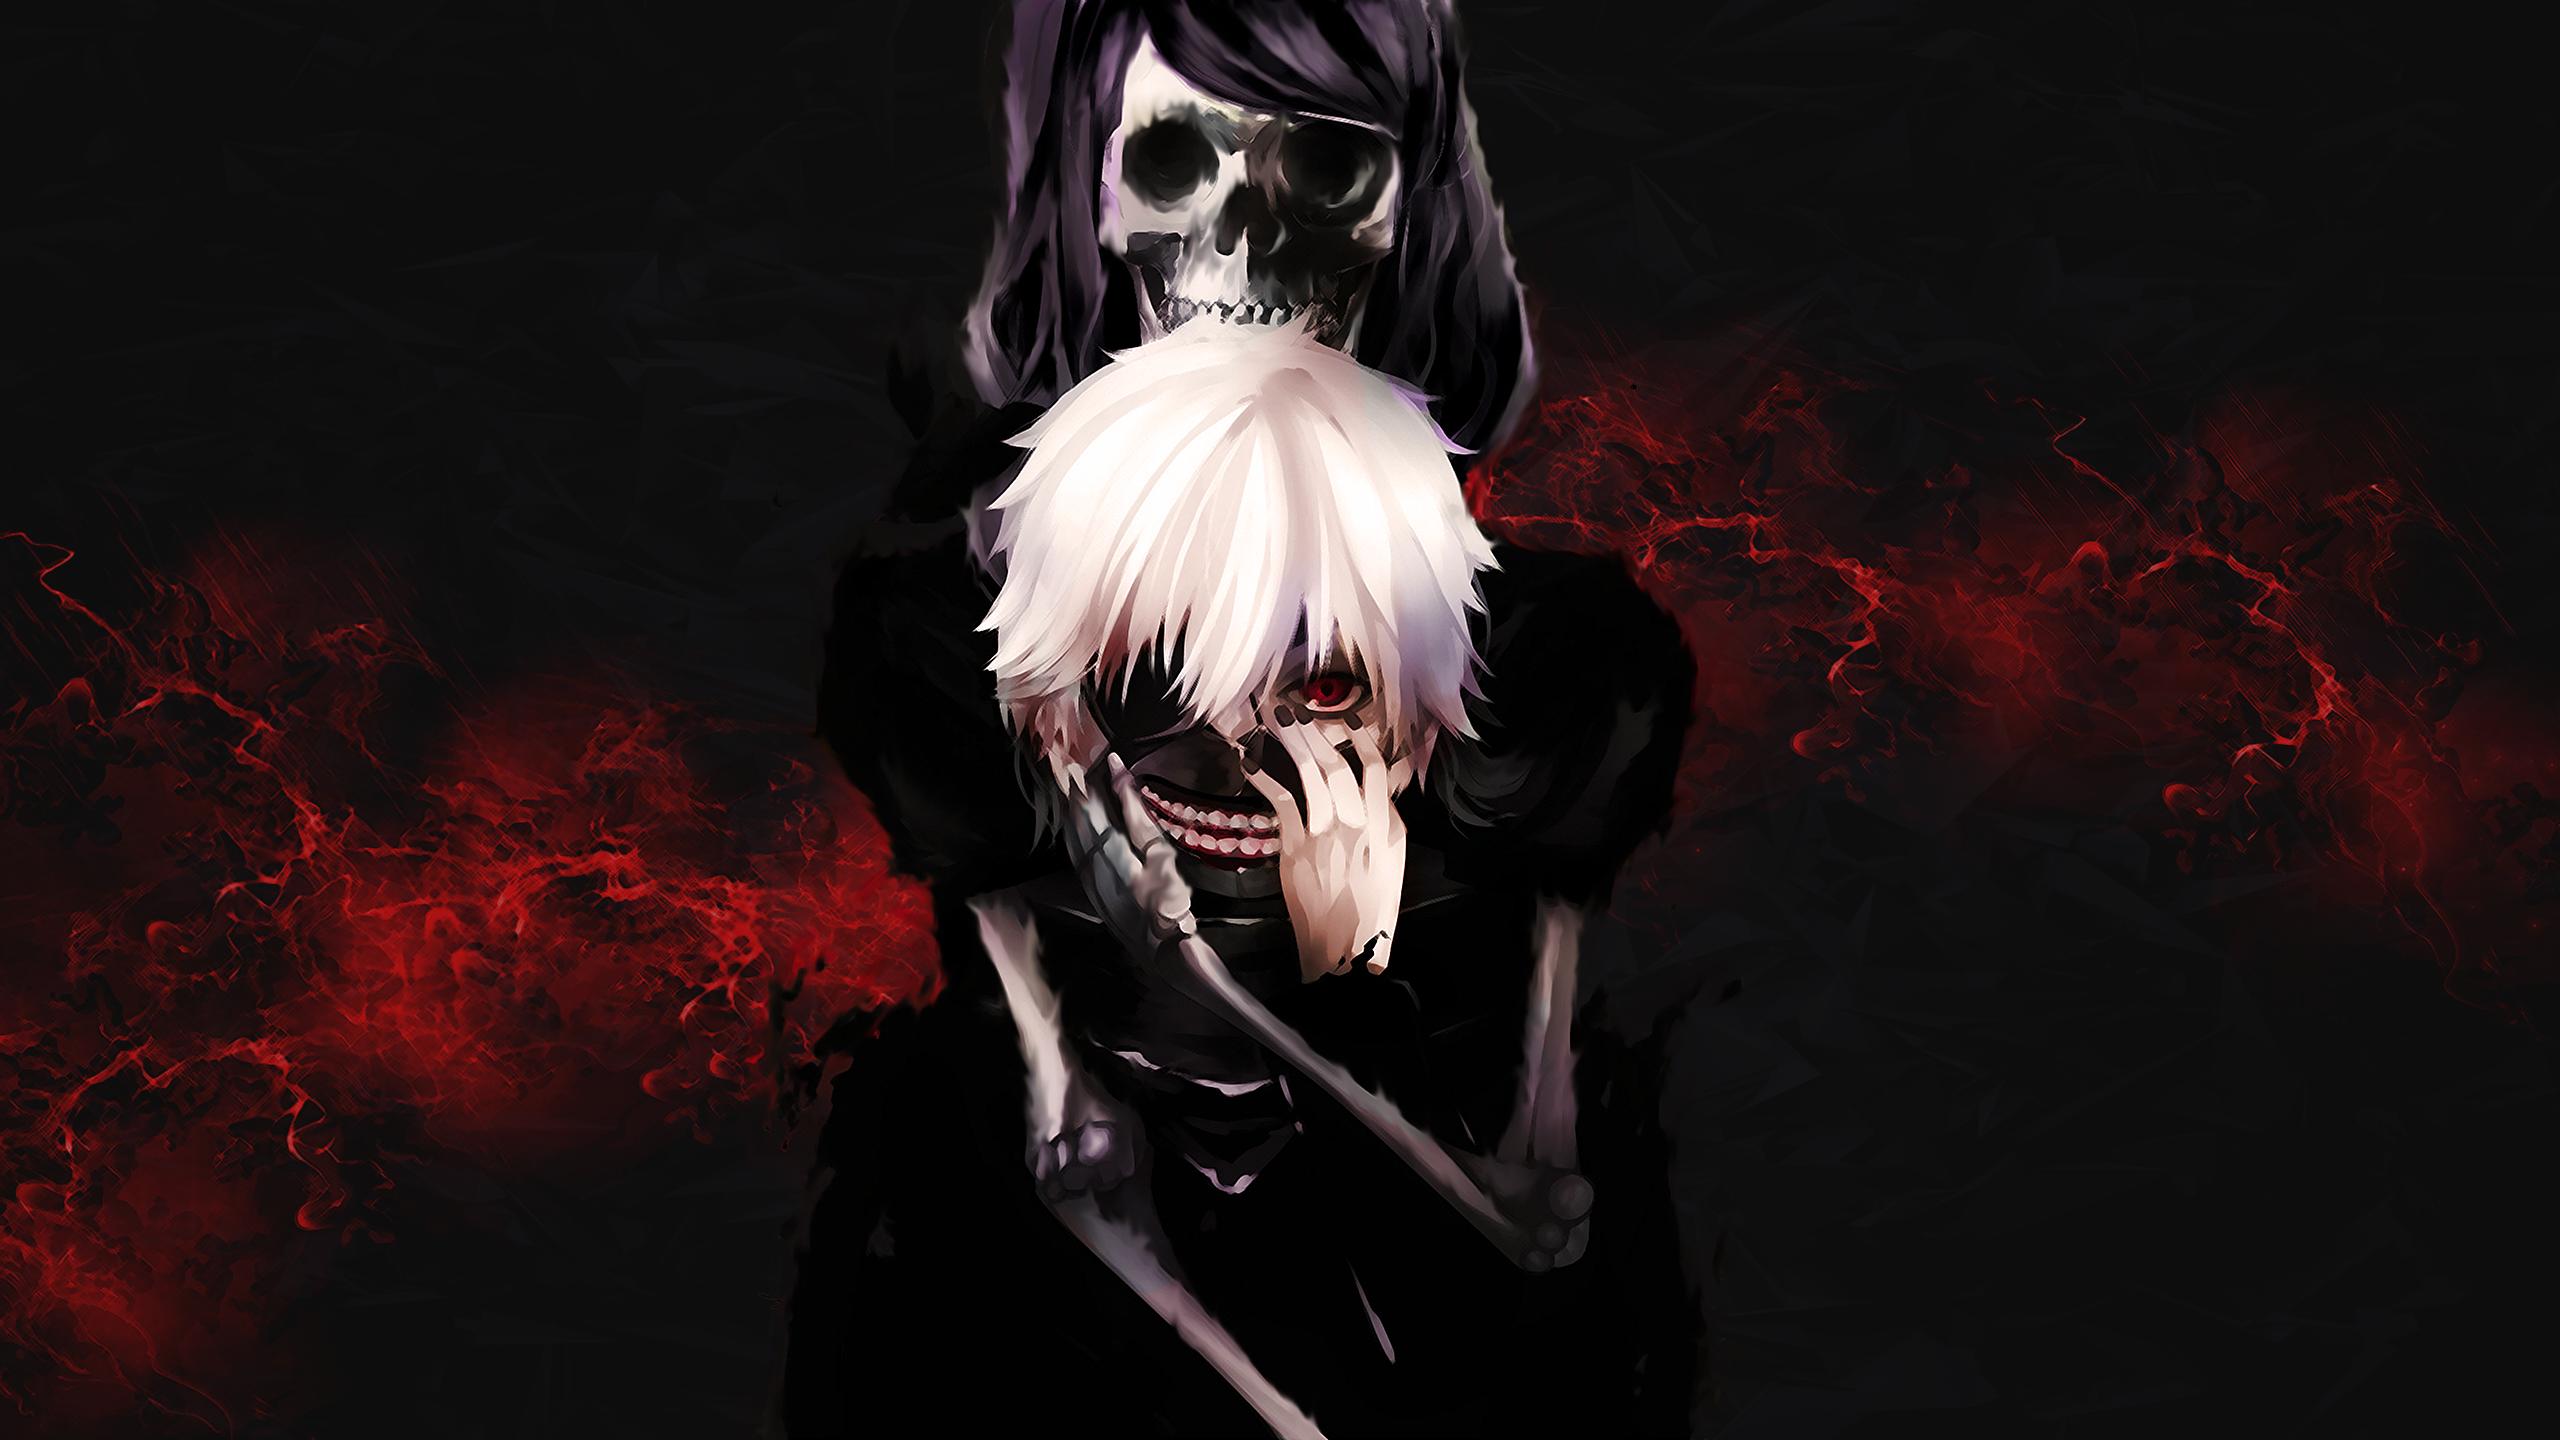 Tokyo Ghoul Wallpaper That I Remade Anime